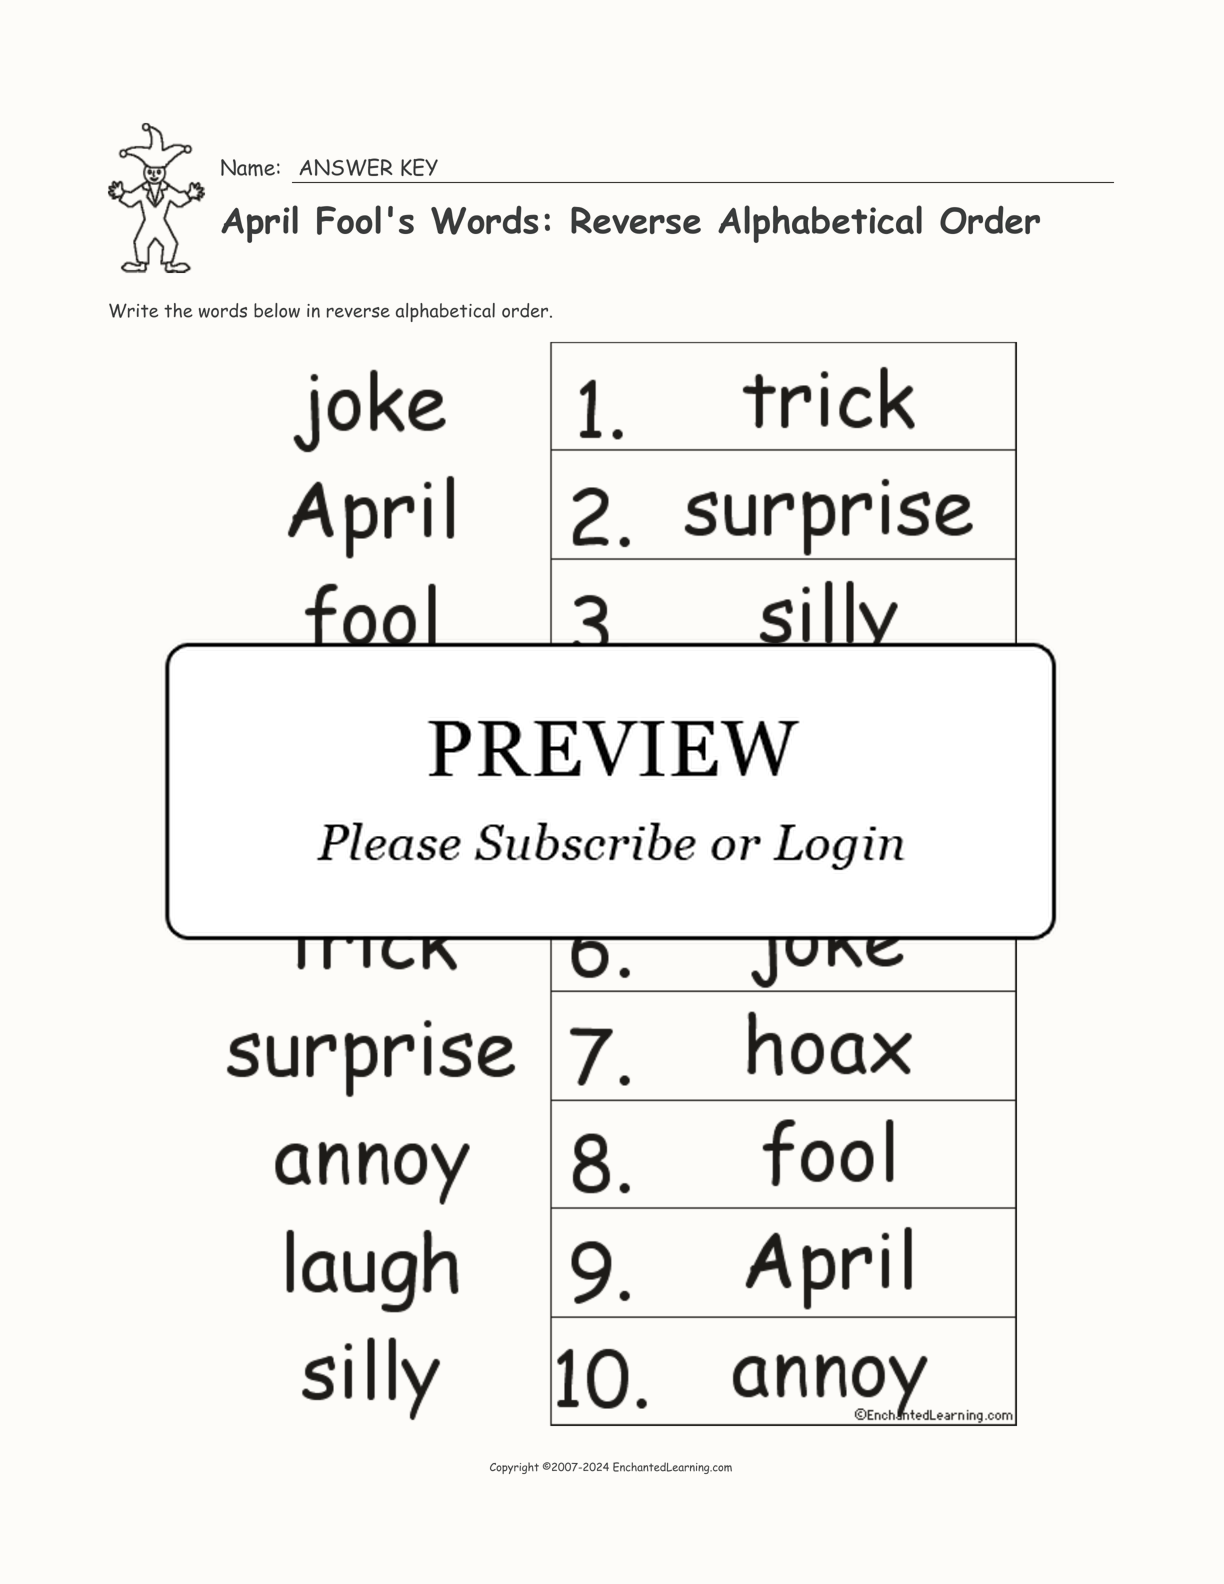 April Fool's Words: Reverse Alphabetical Order interactive worksheet page 2